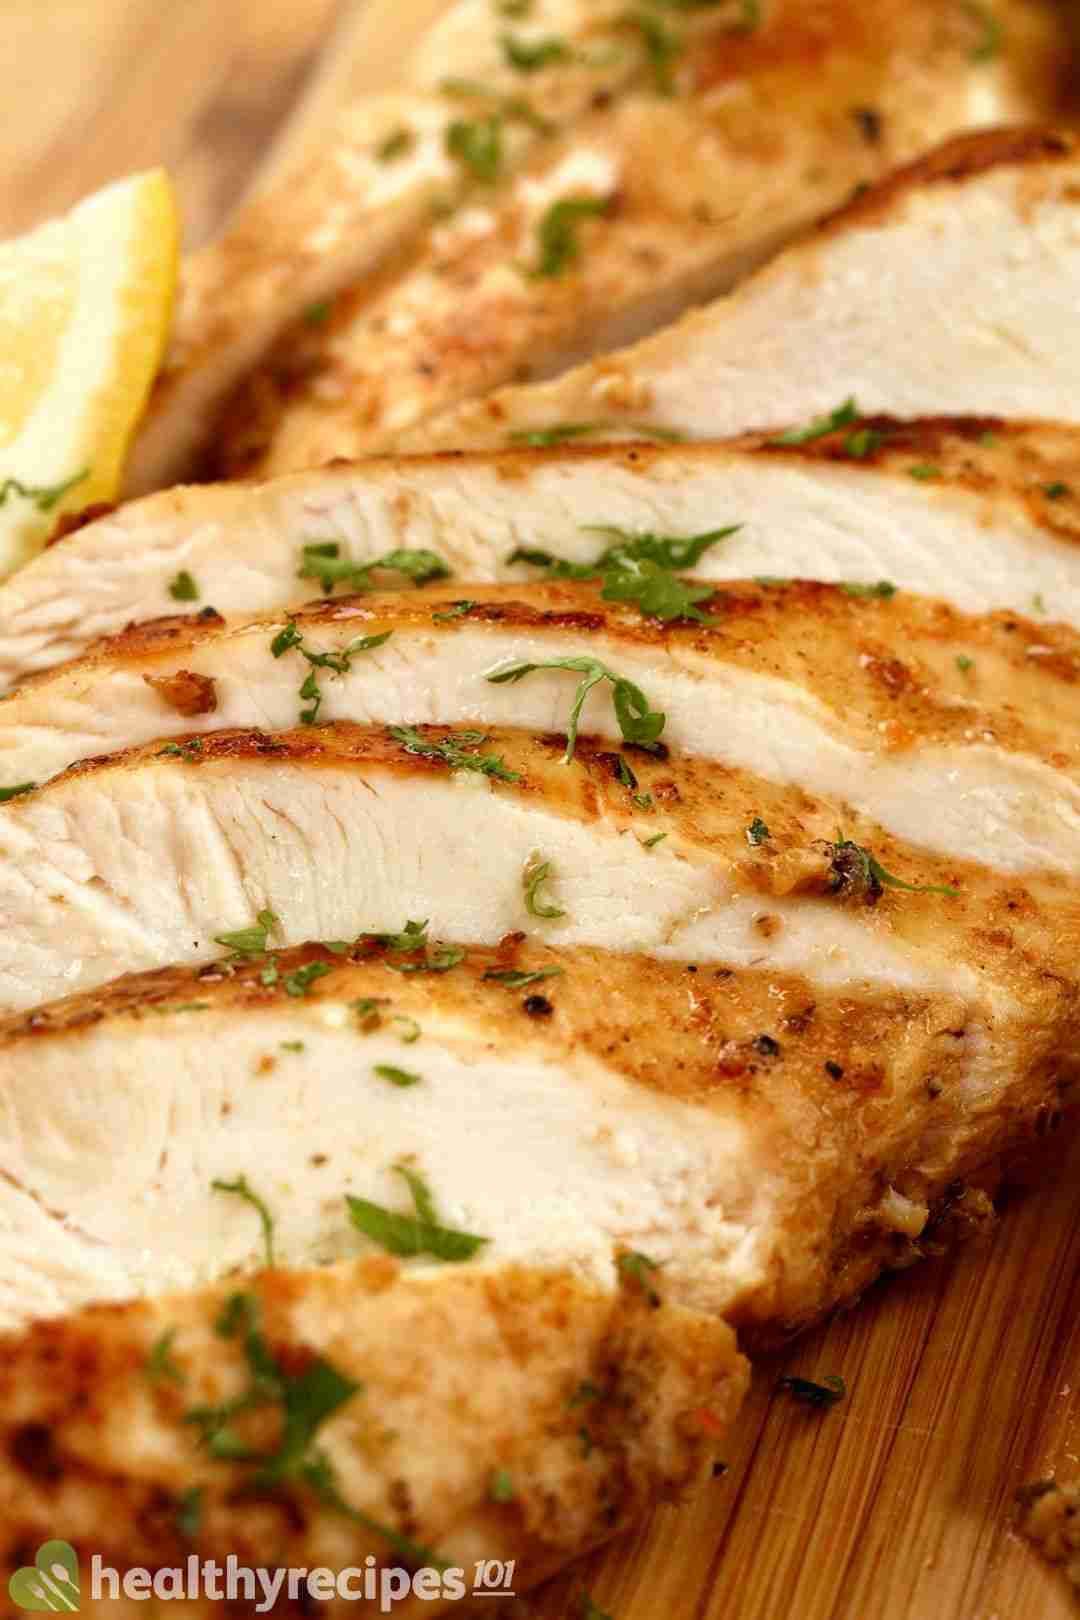 Instant Pot Chicken Breast Recipe: Perfect for Last-Minute Meals